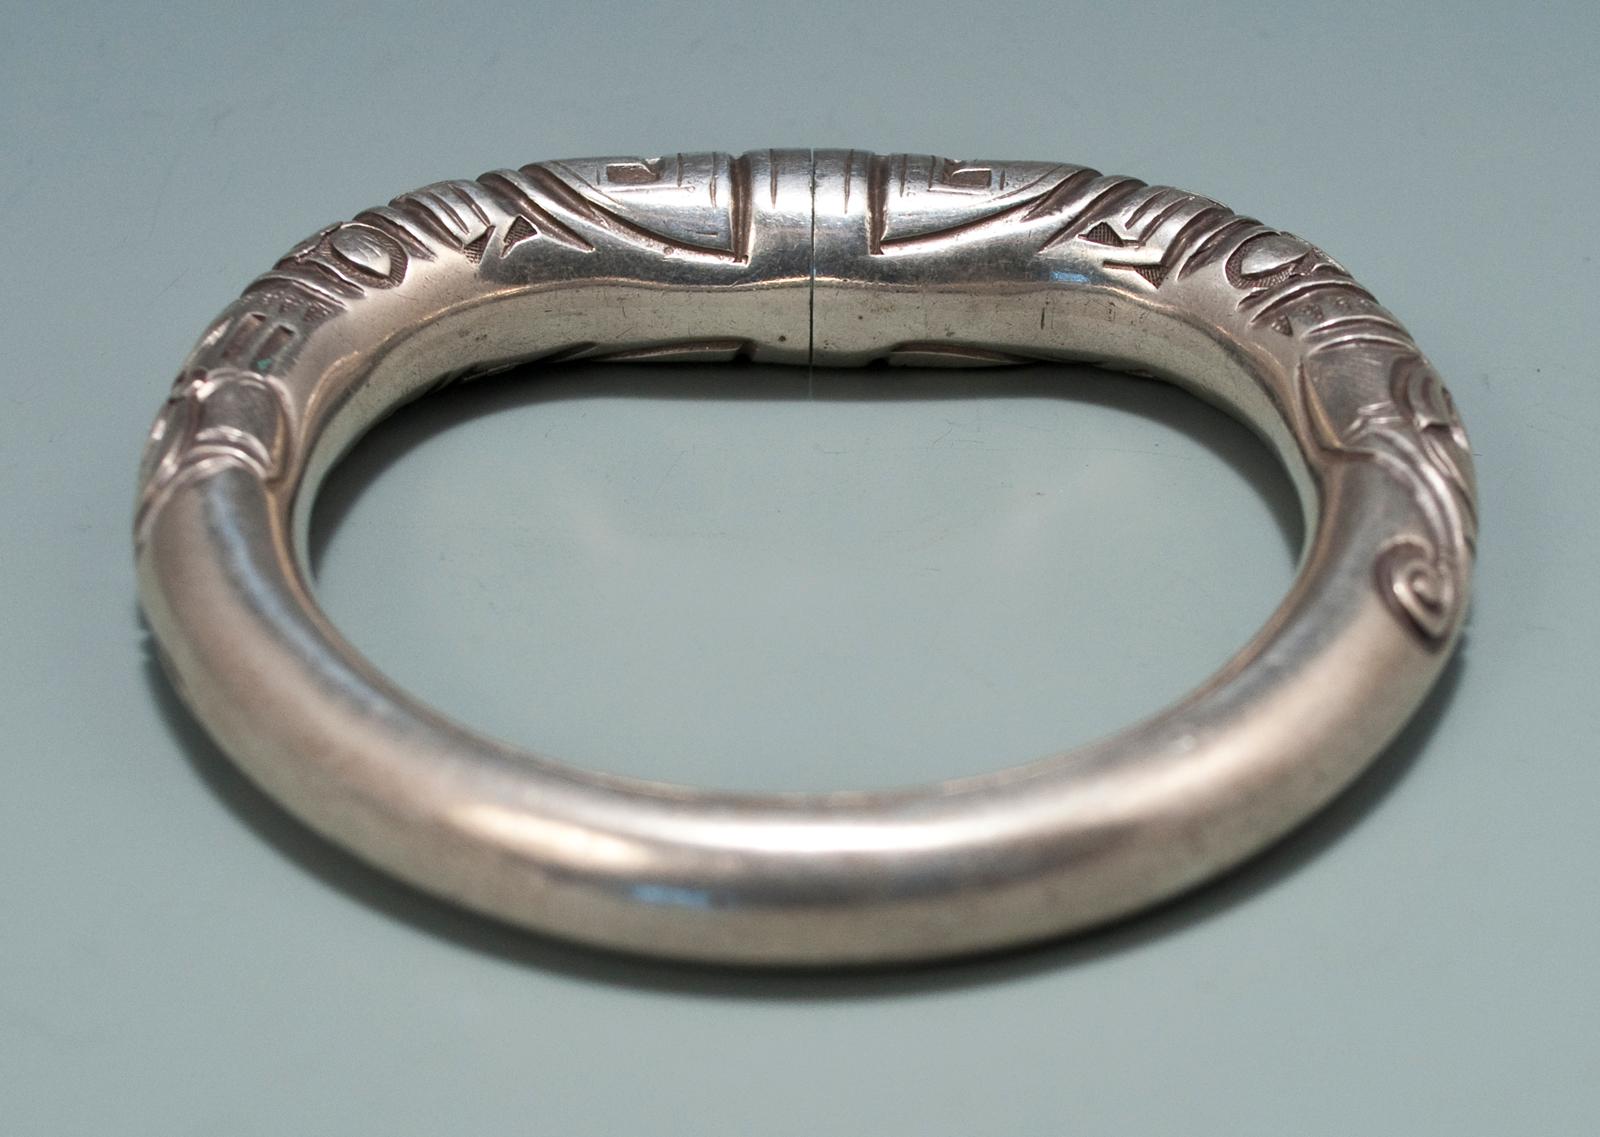 Hand-Crafted Early 20th Century Silver Wedding Bangle Bracelet, China